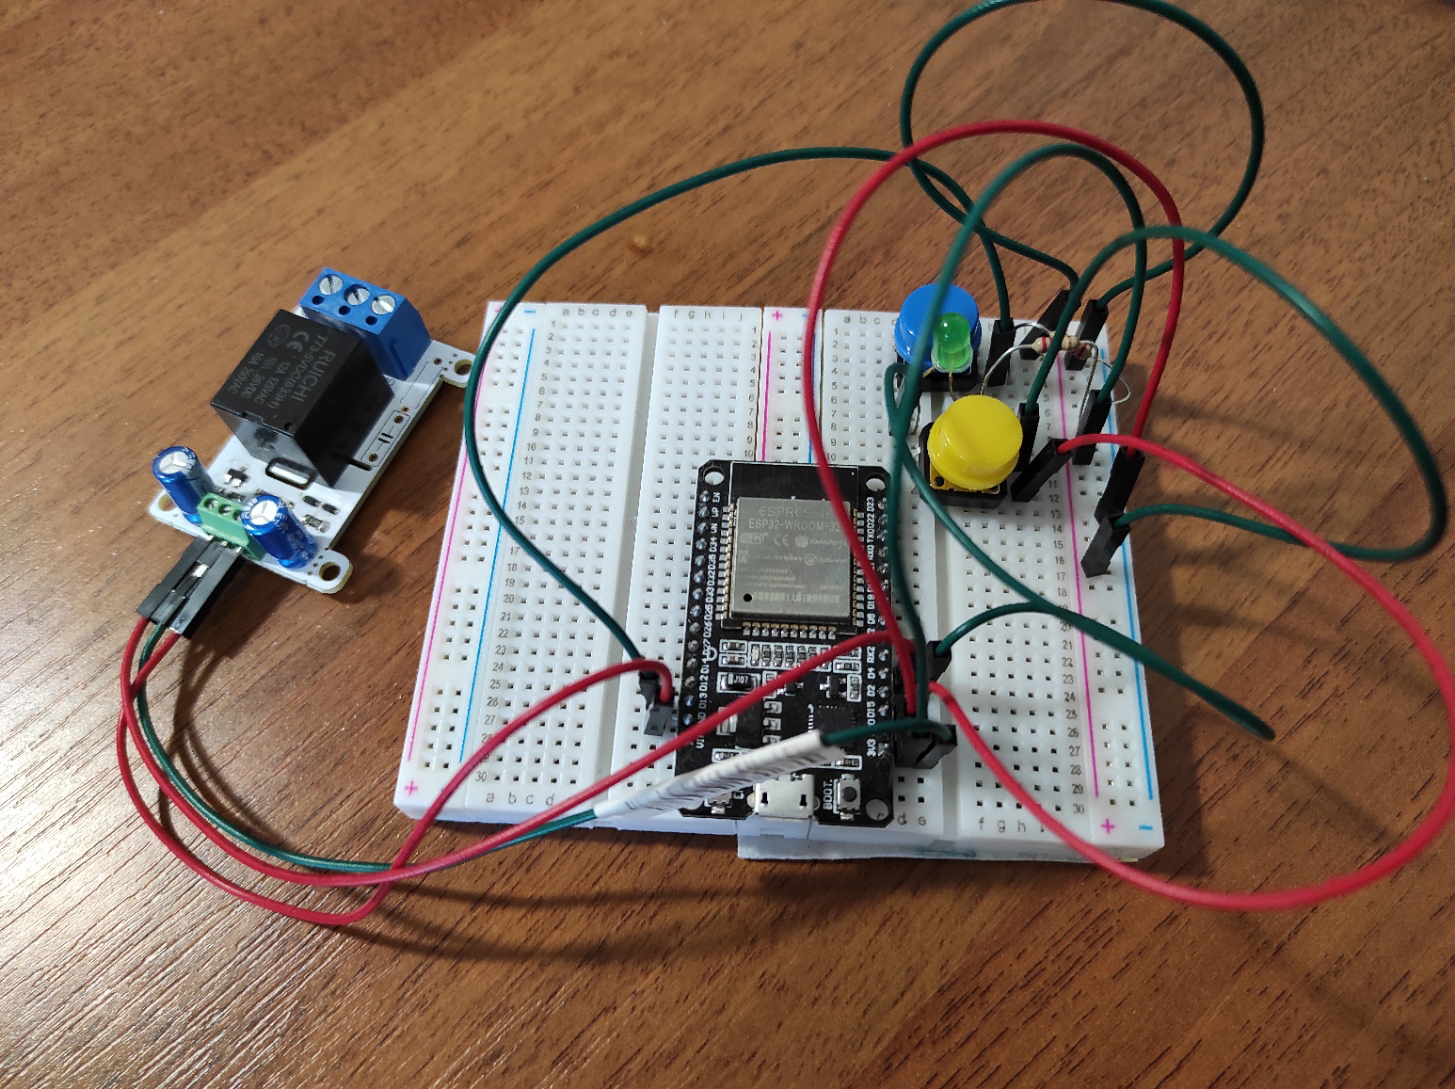 Wi-Fi relay prototype based on the ESP32 microcontroller